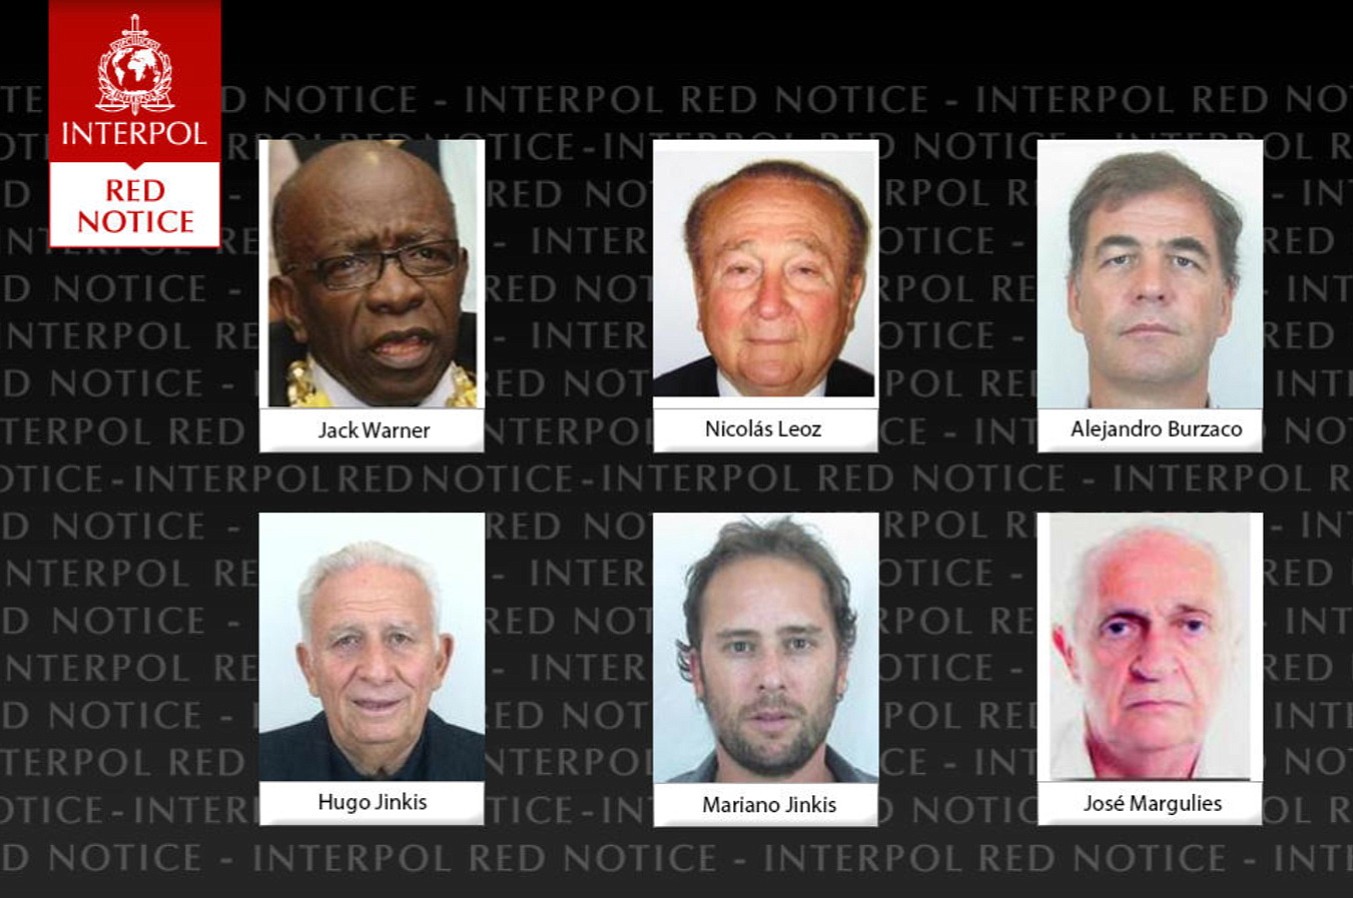 This screengrab of Interpol's website shows undated portraits of men who were added to Interpol's most wanted list on Wednesday. Top row, from left to right, are Jack Warner, Nicolas Leoz and Alejandro Burzaco. Bottom row from left are Hugo Jinkis, Mariano Jinkis and Jose Margulies. Interpol added these men with ties to FIFA to its most wanted list, issuing an international alert for the two former FIFA officials and four executives on charges including racketeering and corruption.